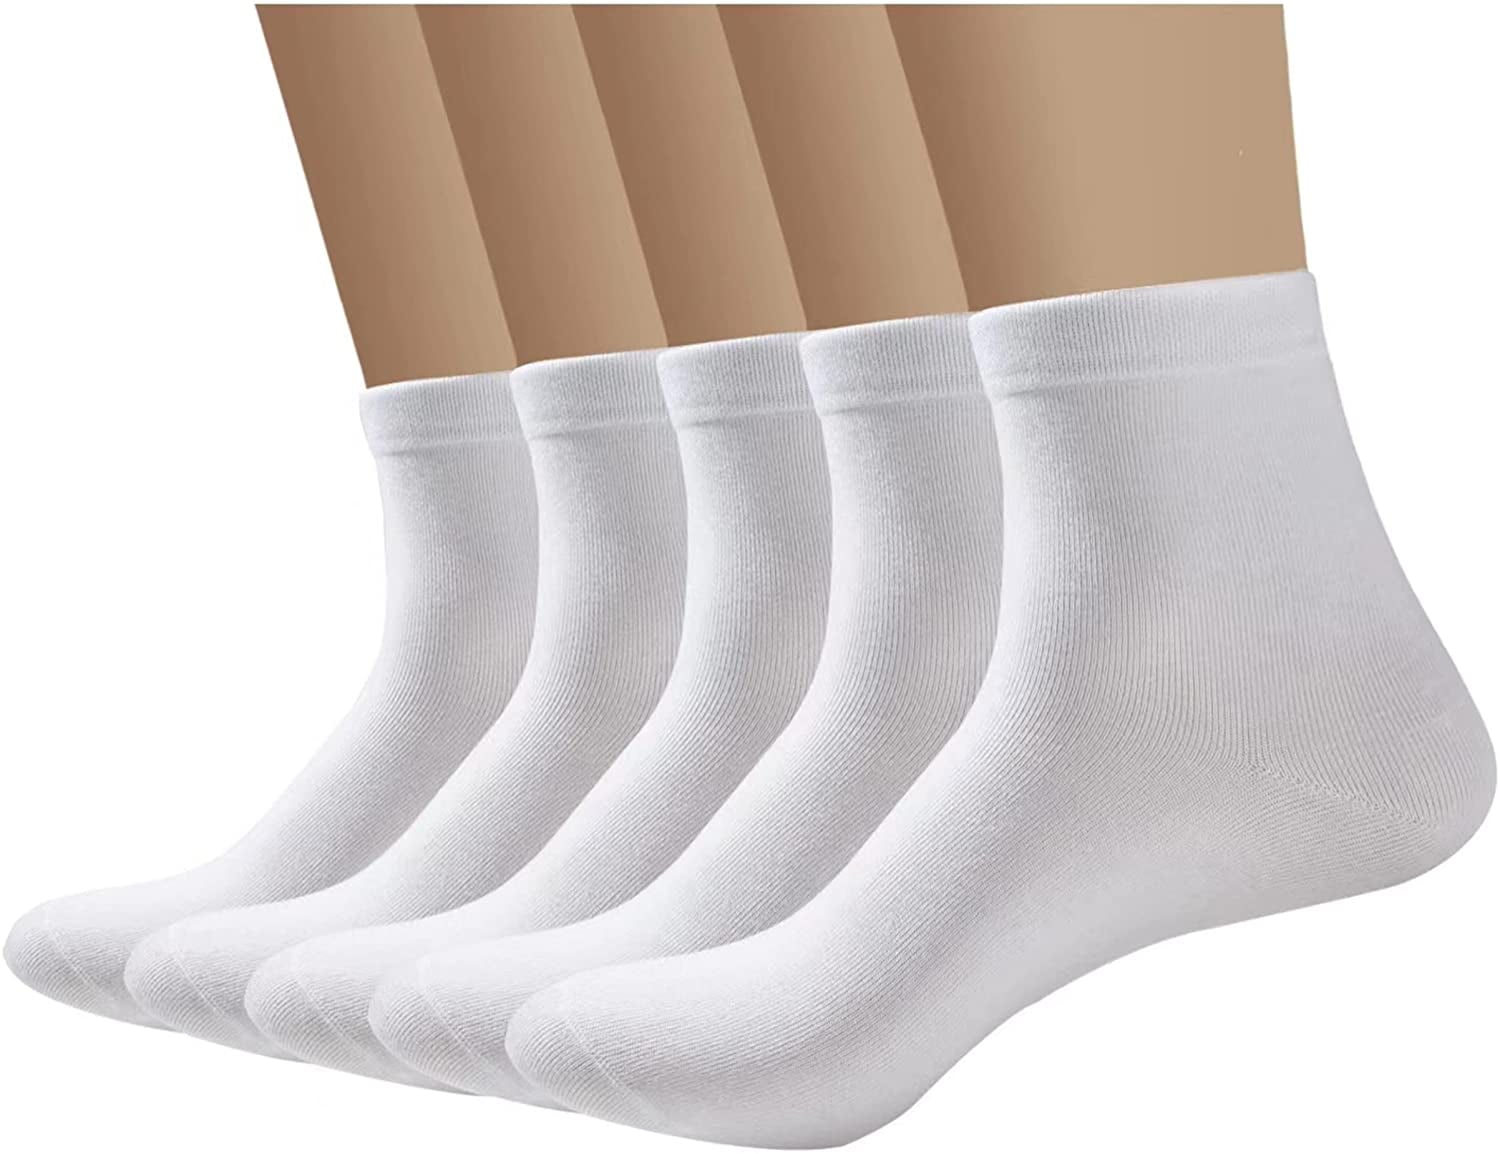 SERISIMPLE Bamboo Men Breathable Sock Low Quarter Thin Ankle Comfort Cool  Soft Socks 5 Pairs (White, Large)